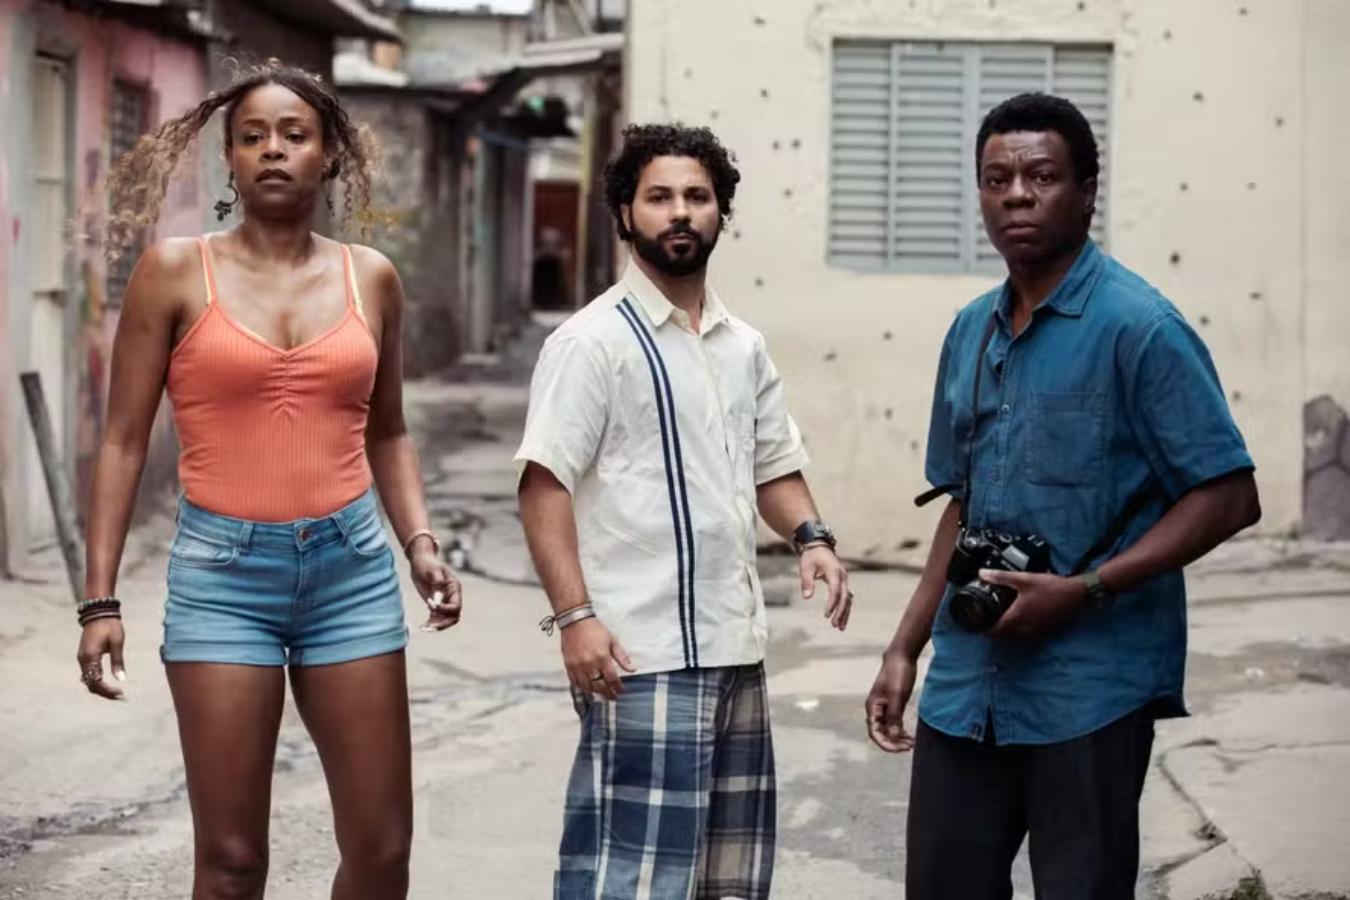 Spin-off Series from the Film ‘City of God’ Set to Premiere on Max and HBO